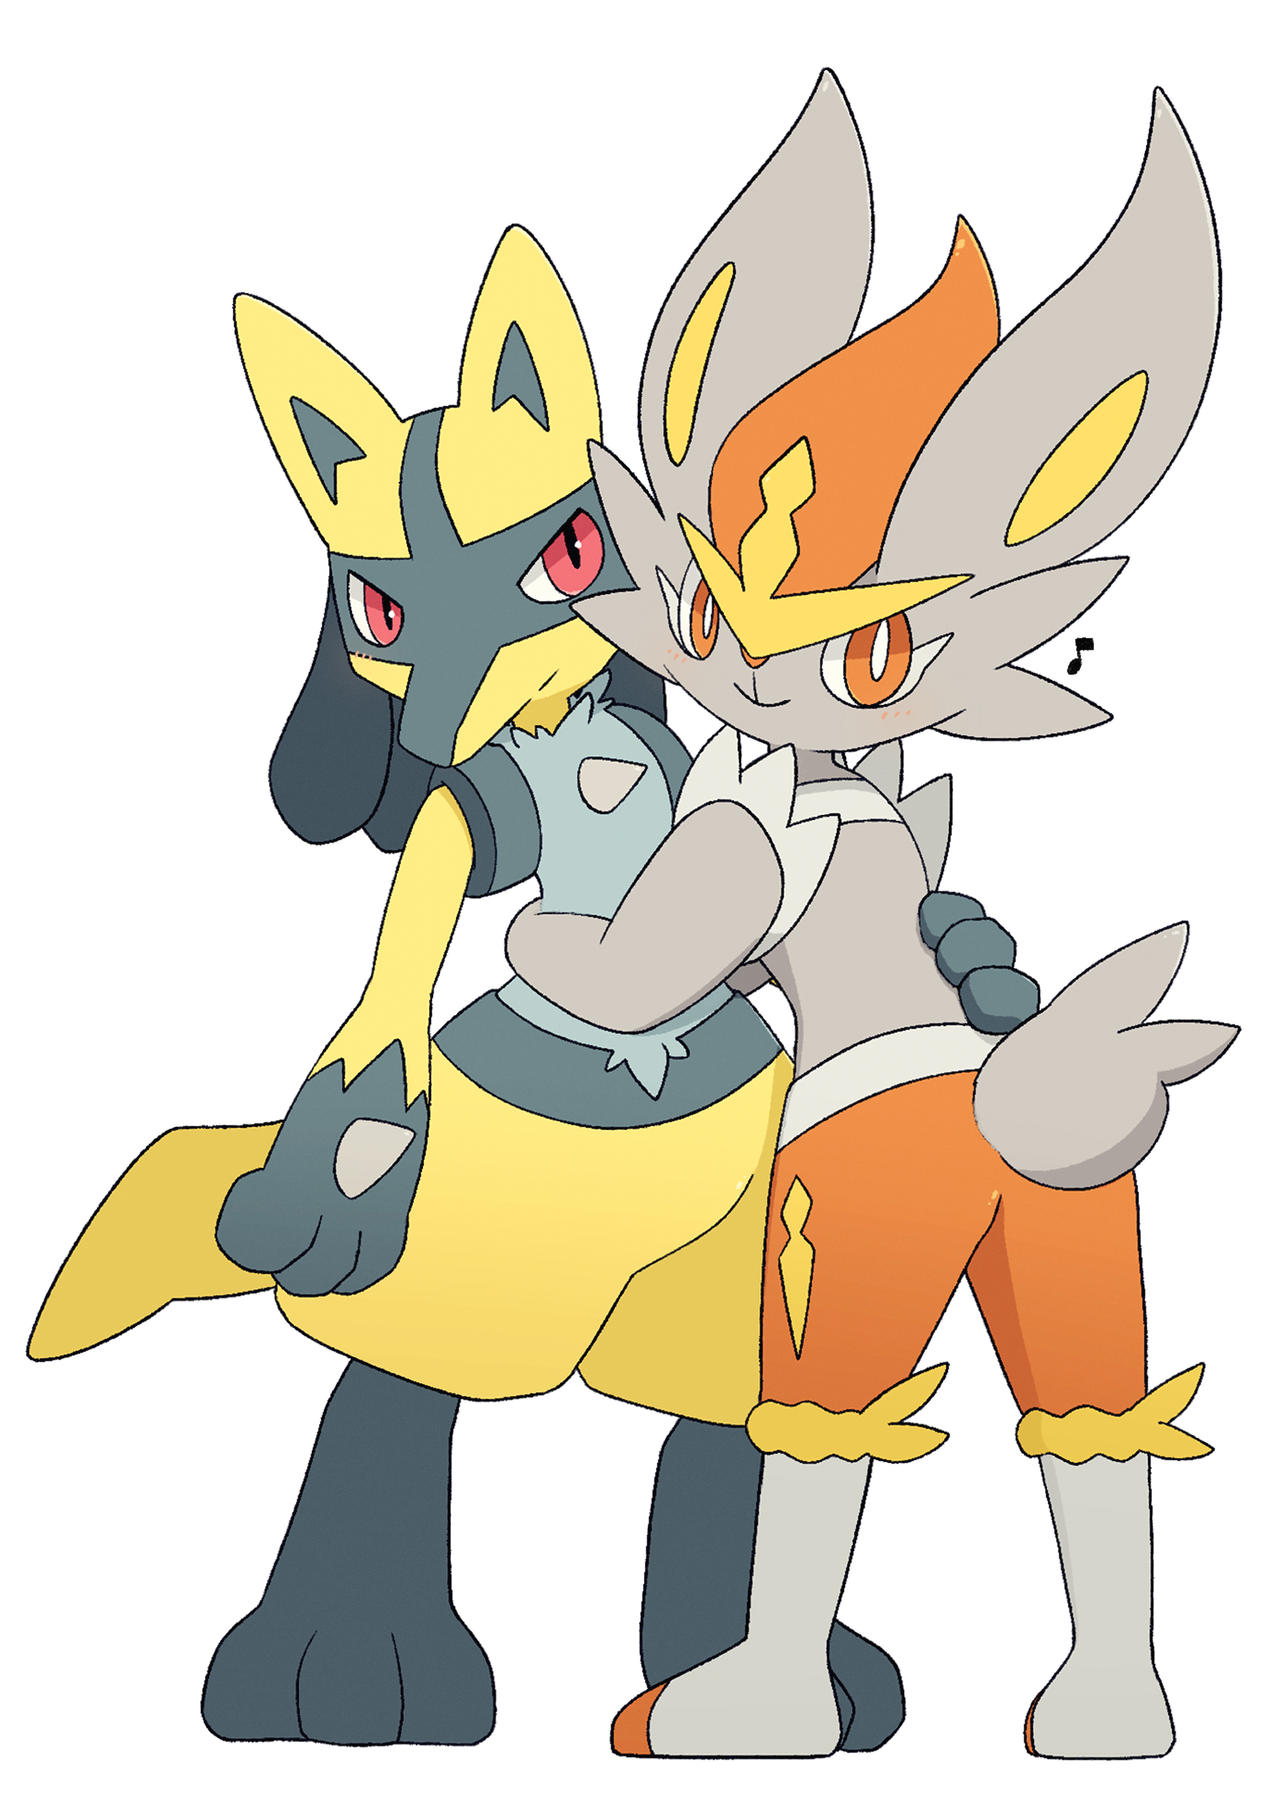 Valentine the shiny Lucario by InFamousCrusader on DeviantArt